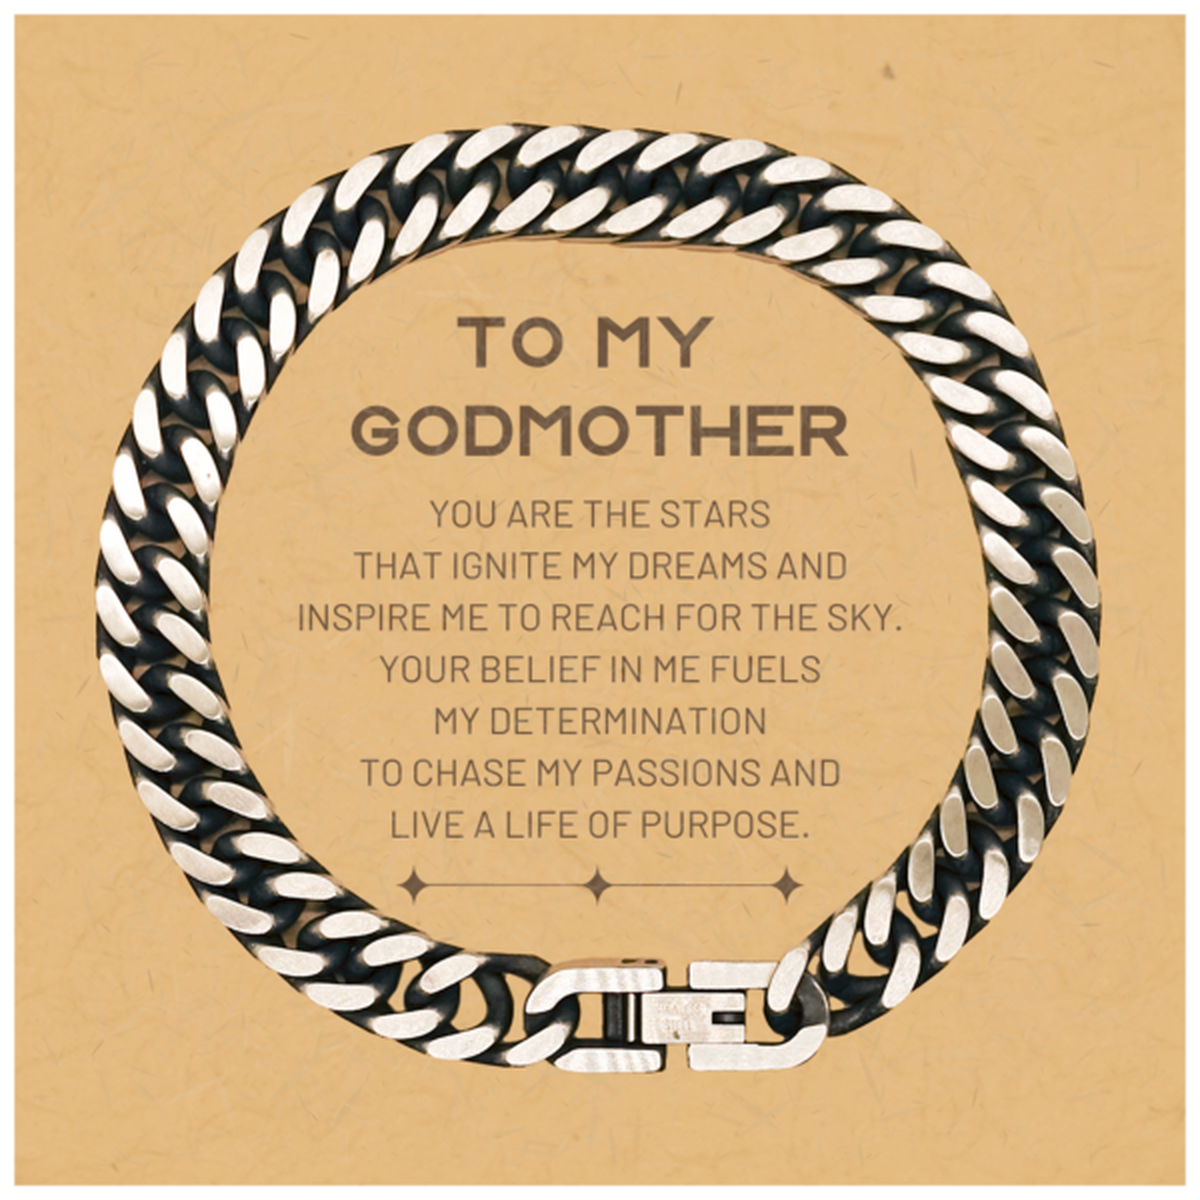 To My Godmother Cuban Link Chain Bracelet, You are the stars that ignite my dreams and inspire me to reach for the sky, Birthday Christmas Unique Gifts For Godmother, Thank You Gifts For Godmother